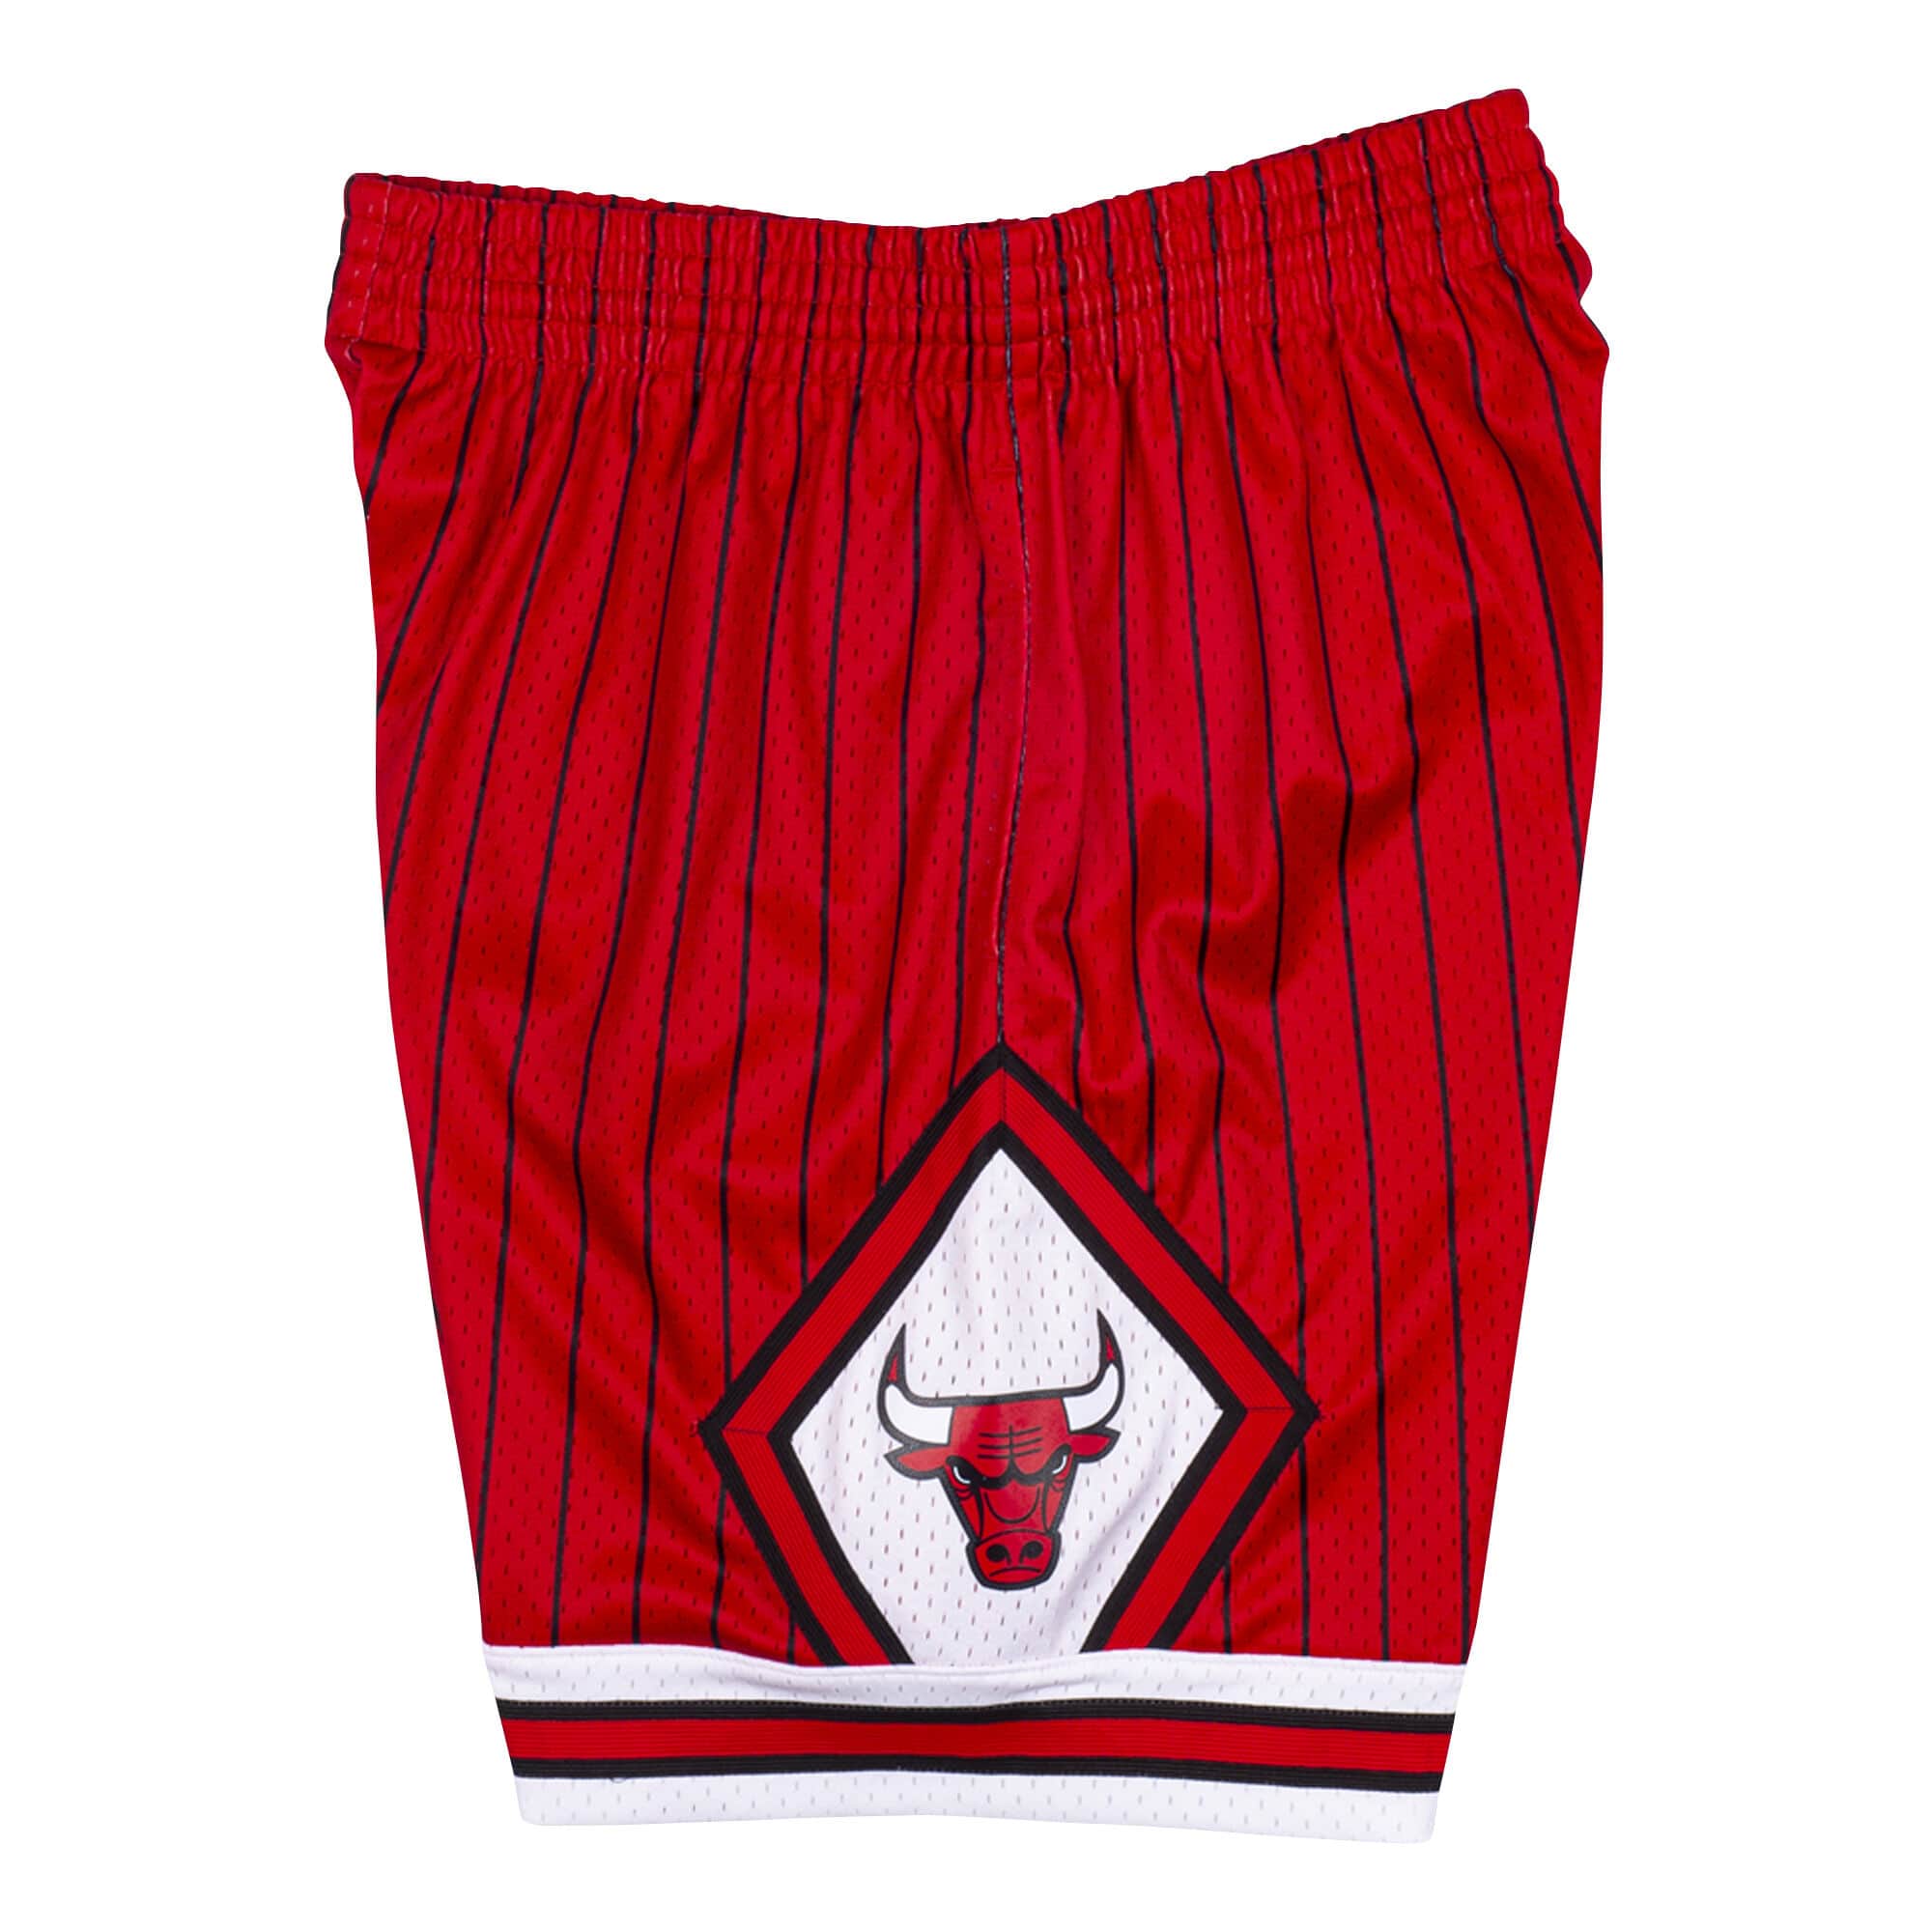 Mitchell and Ness Swingman Chicago Bulls Shorts With pockets